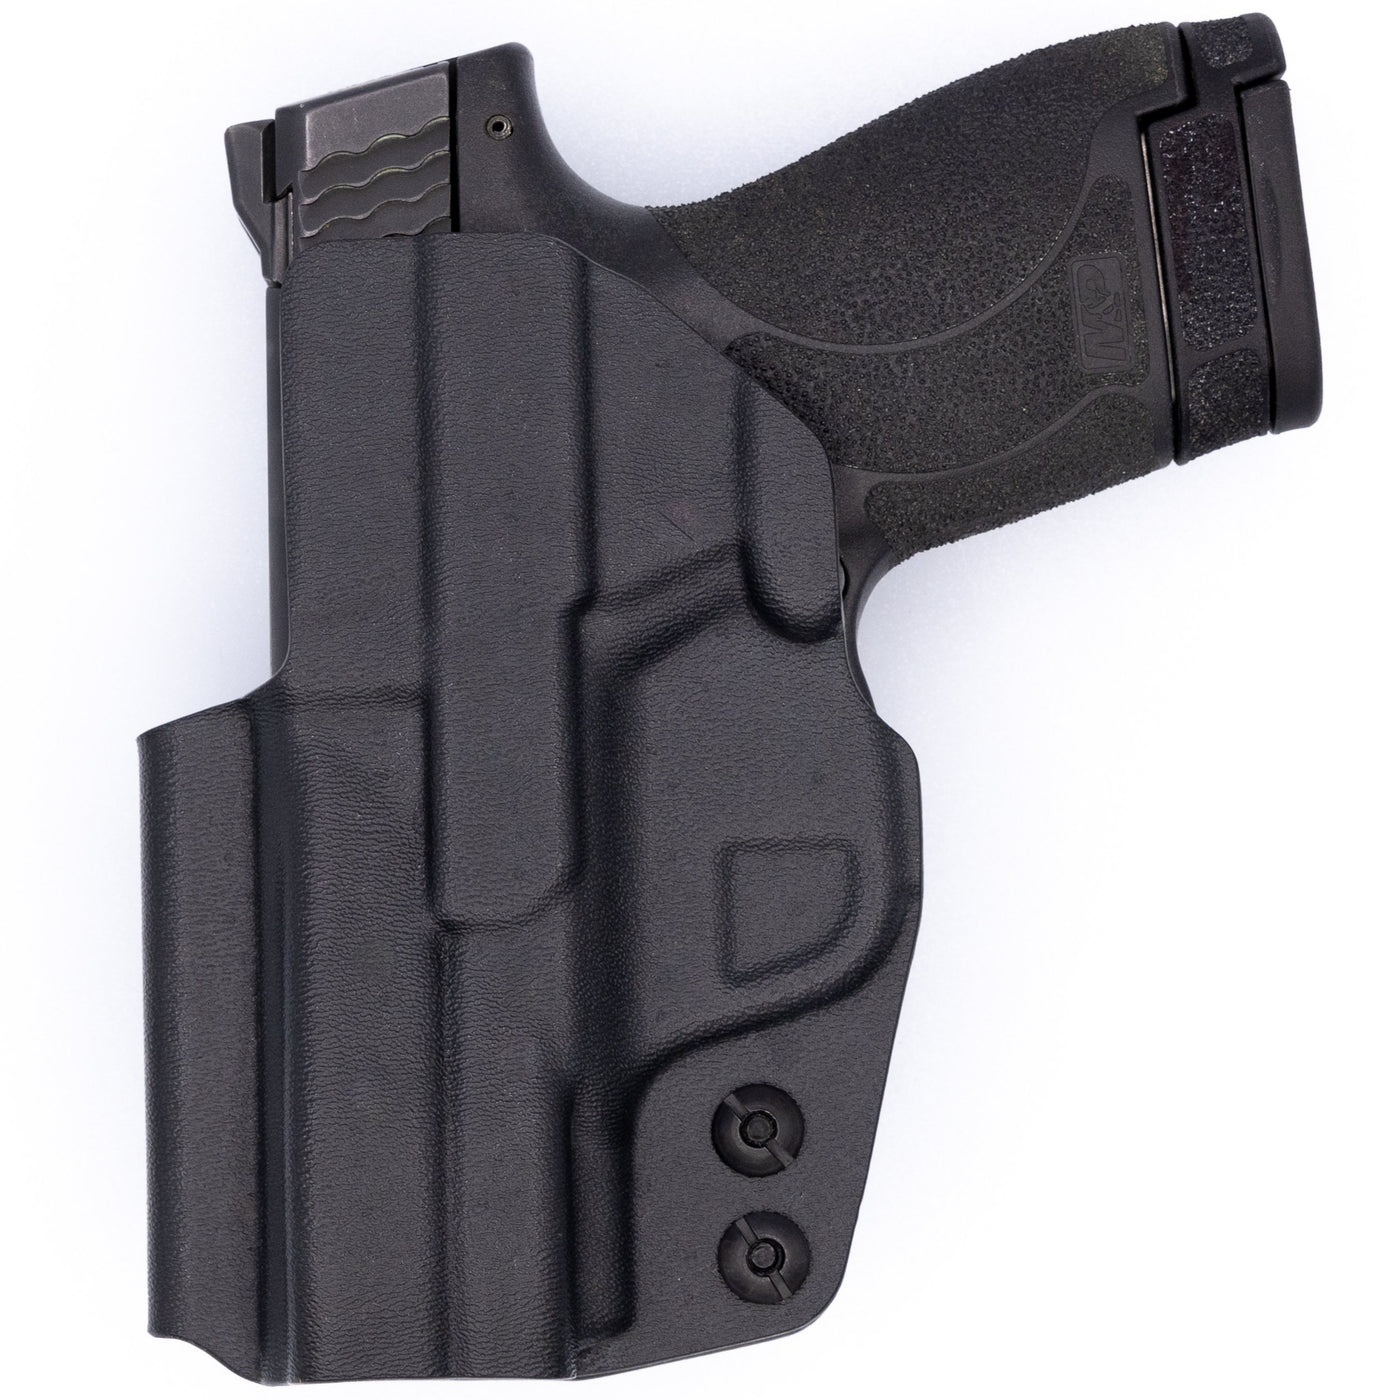 C&G Holsters quick ship Covert IWB kydex holster for S&W M&P Shield 9/40 in black